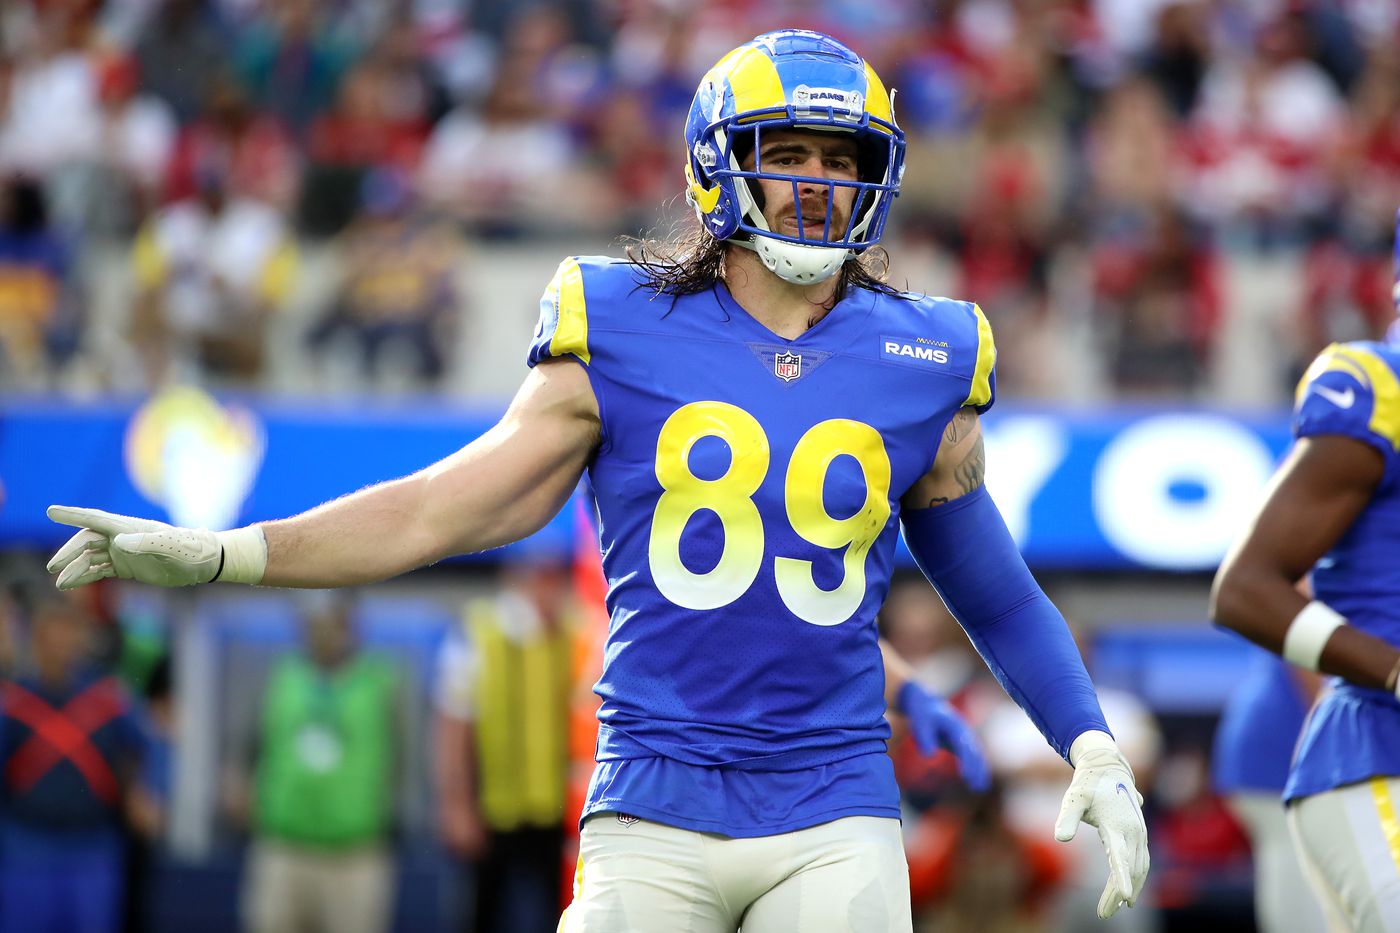 Splitting up tight ends by scoring tiers